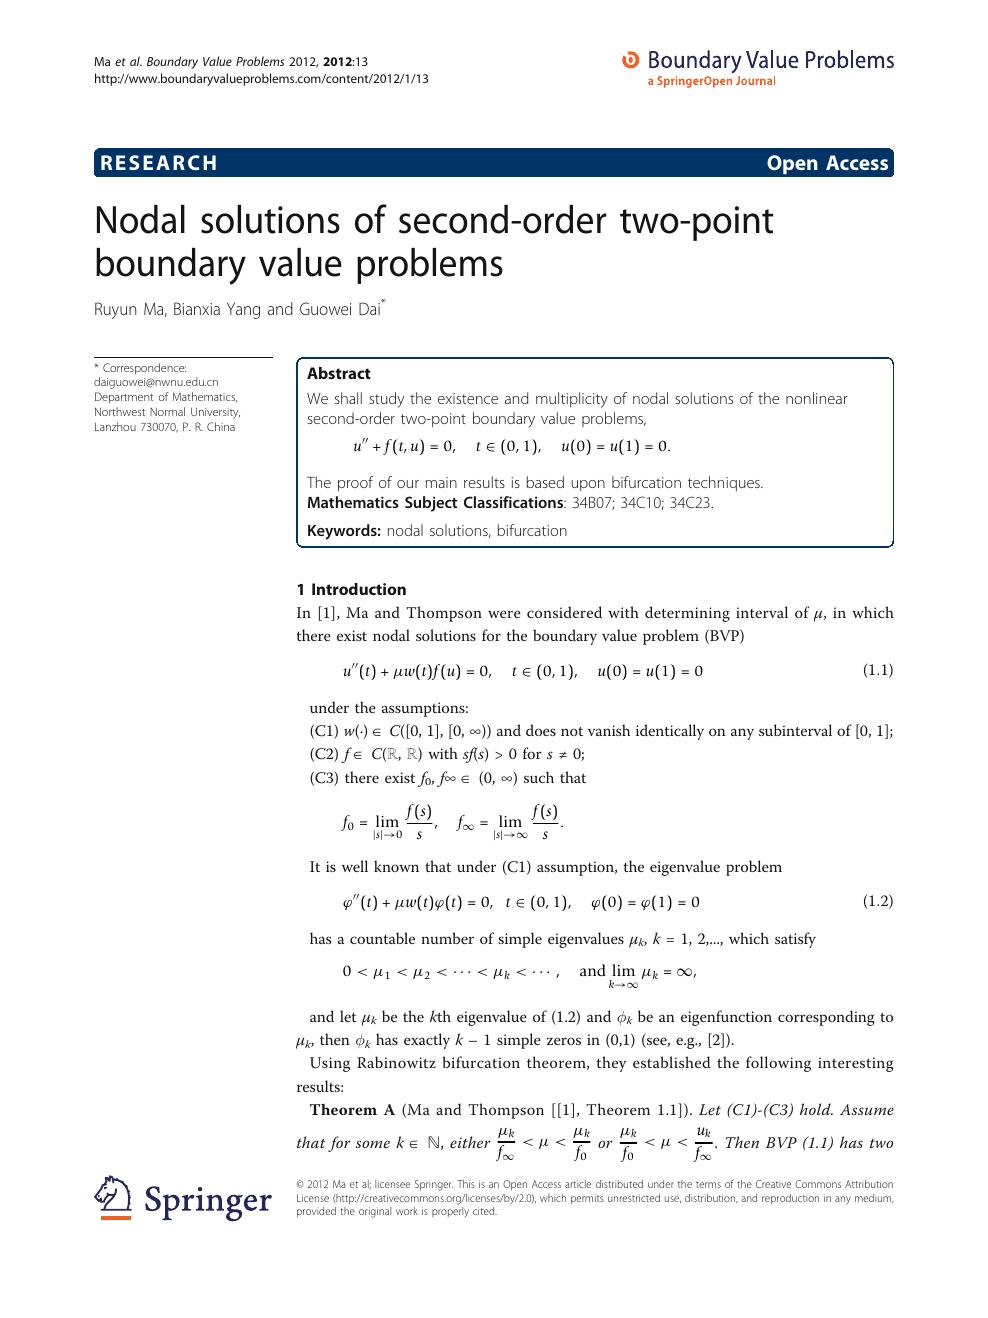 Nodal Solutions Of Second Order Two Point Boundary Value Problems Topic Of Research Paper In Mathematics Download Scholarly Article Pdf And Read For Free On Cyberleninka Open Science Hub